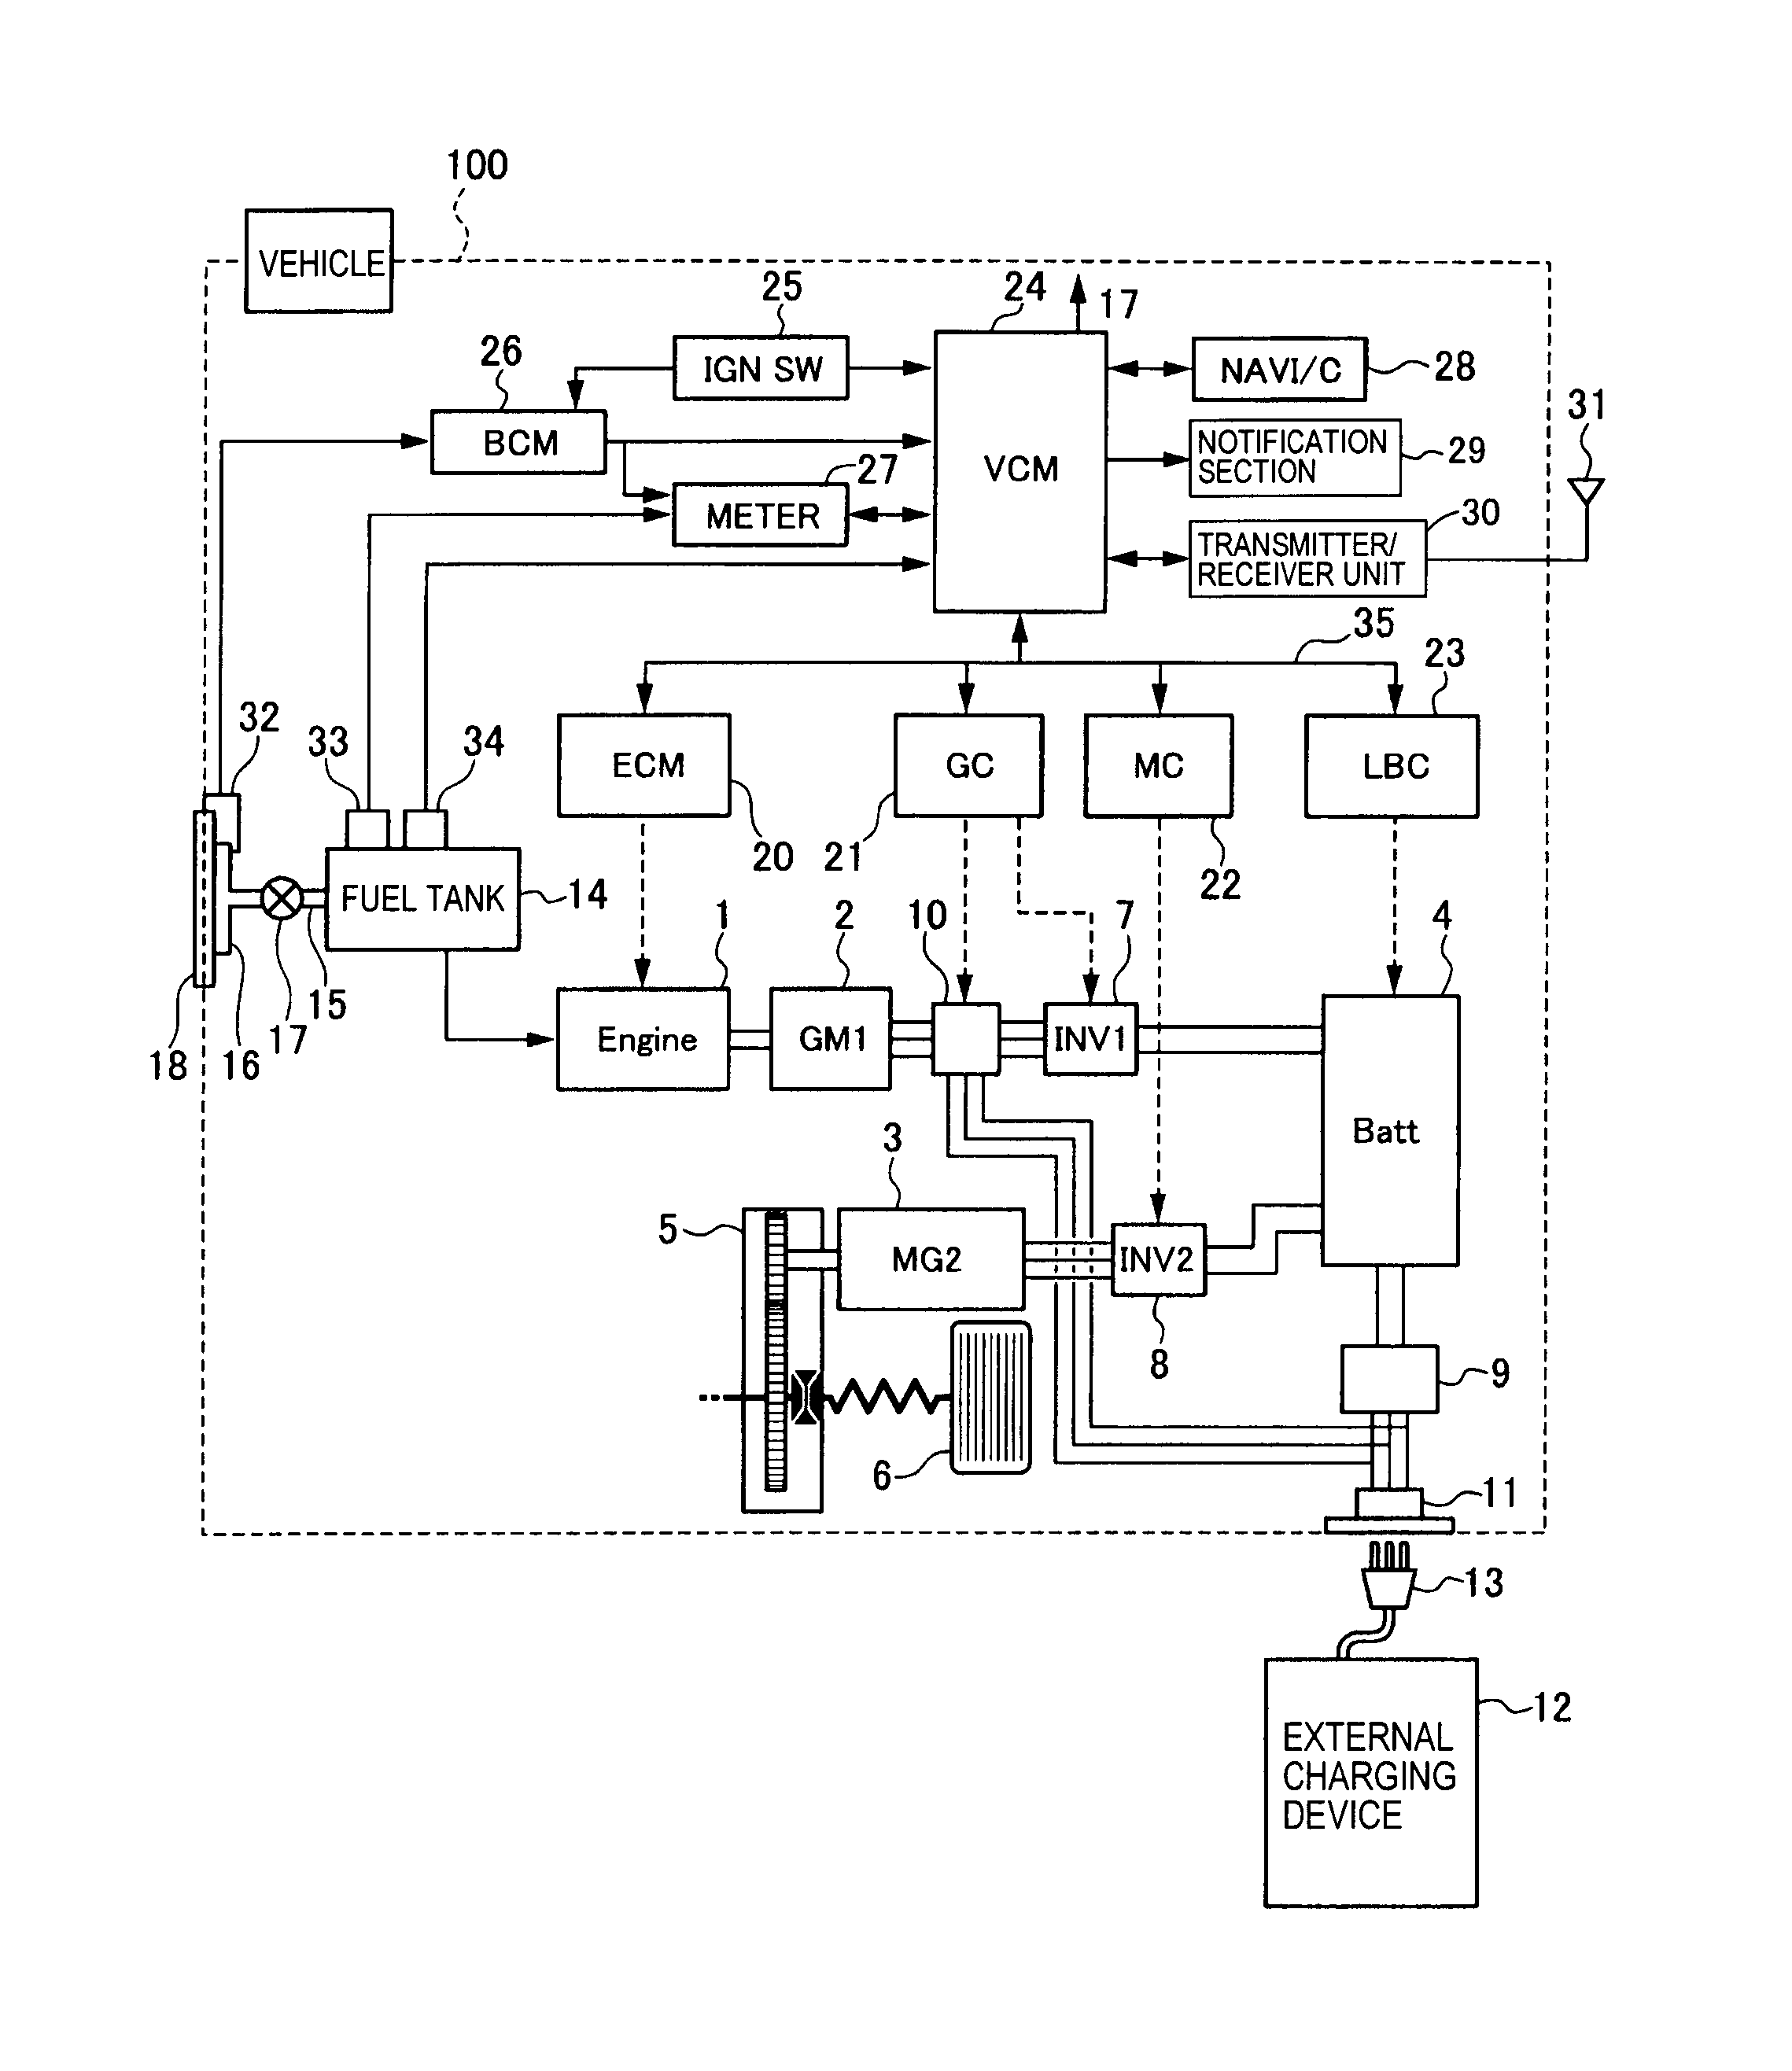 wiring diagram for leviton switch model of5708